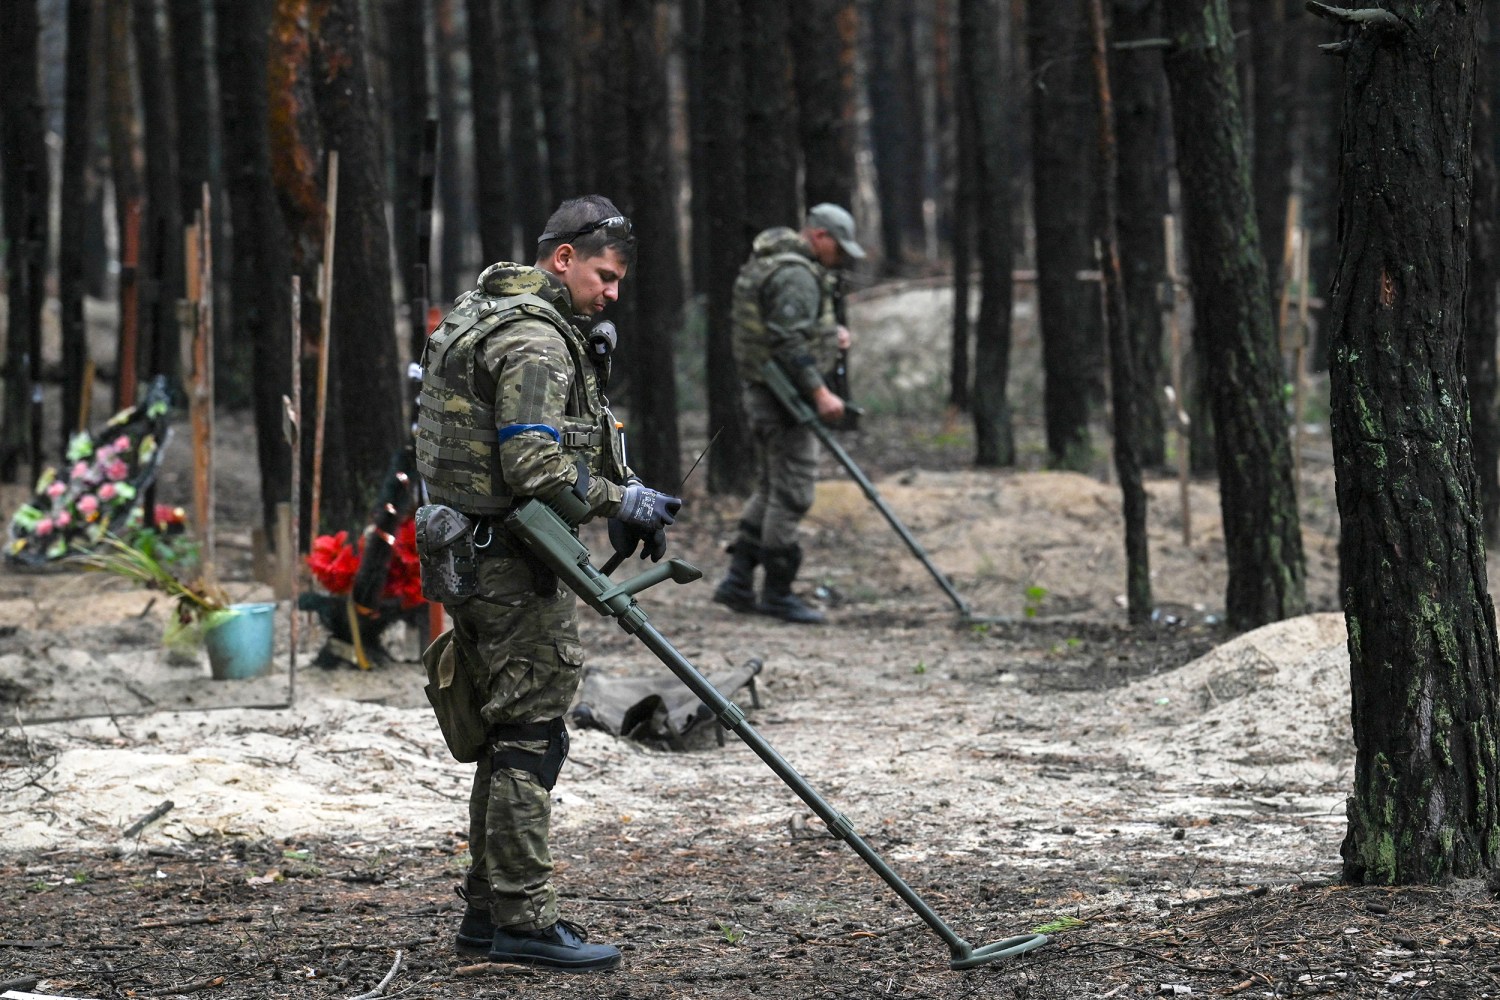 Two years after the Russian invasion, land mines plague one-third